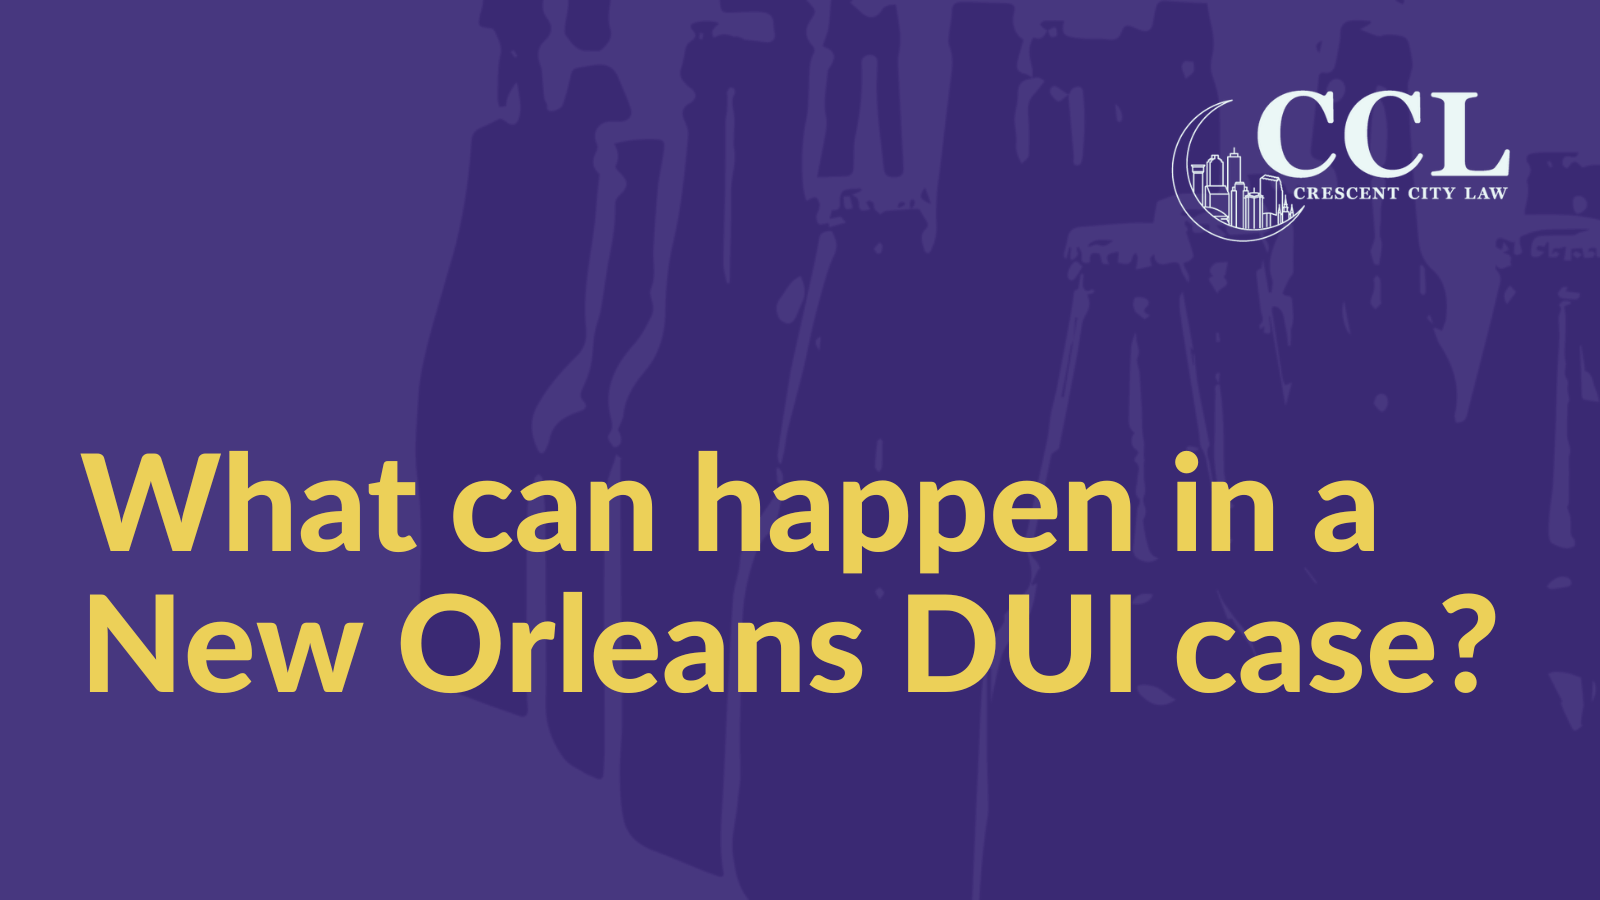 What can happen in a New Orleans DUI case - Crescent City Law new orleans louisiana